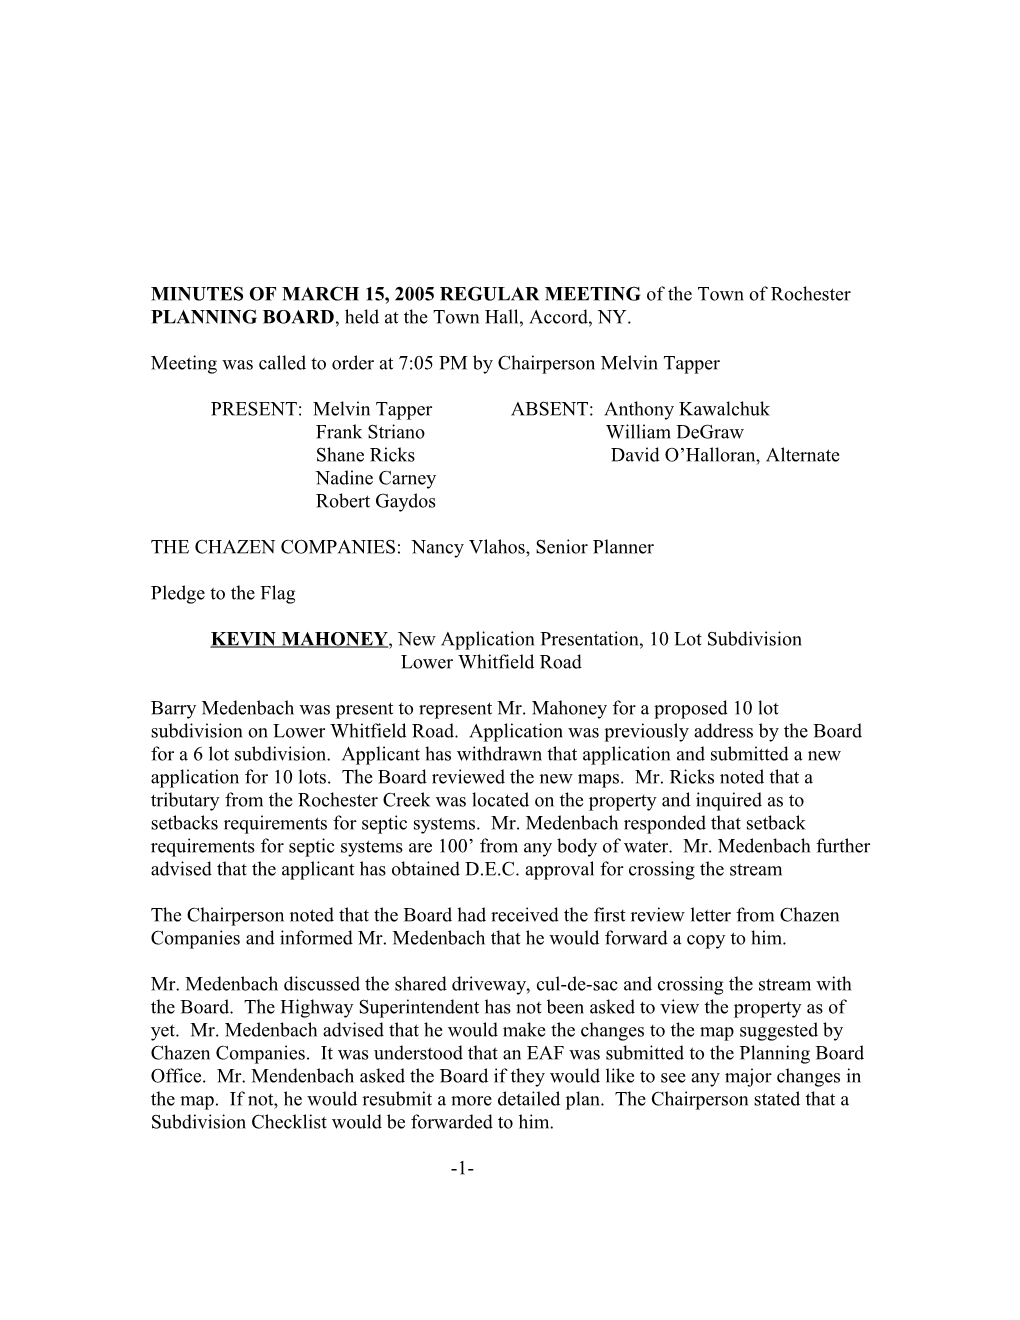 MINUTES of MARCH 15, 2005 REGULAR MEETING of the Town of Rochester PLANNING BOARD, Held